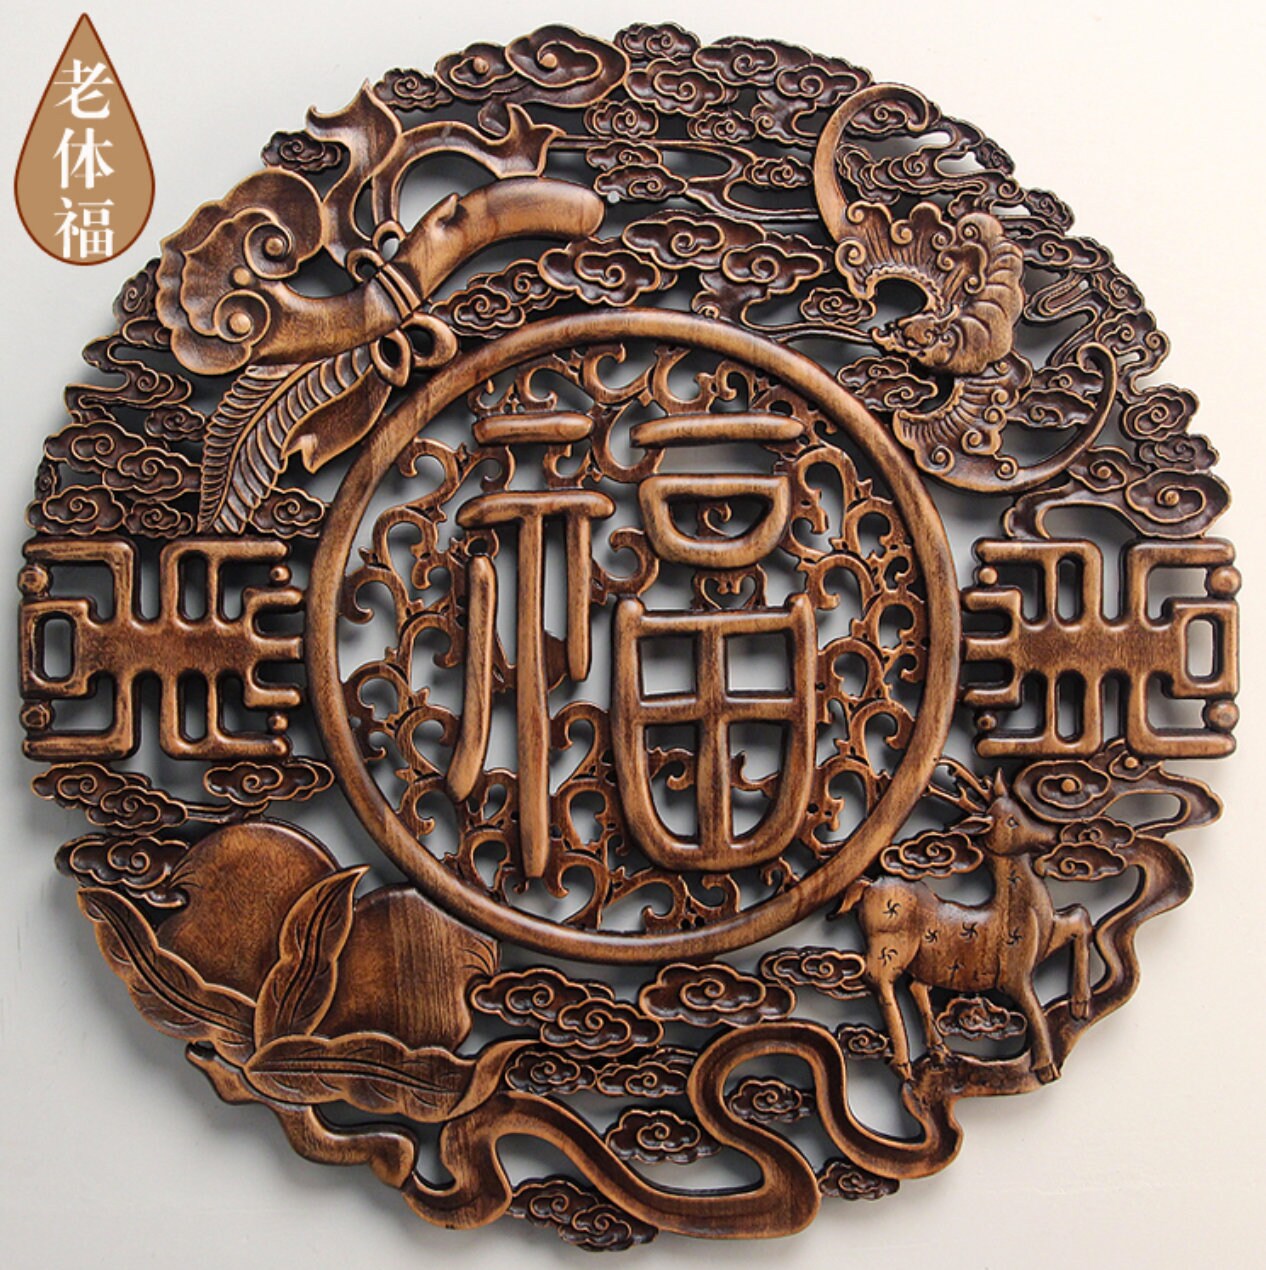 Chinese Antique Camphor Wood Carved Hanging Blessing Fu Wall Decor Woodworking WWC004